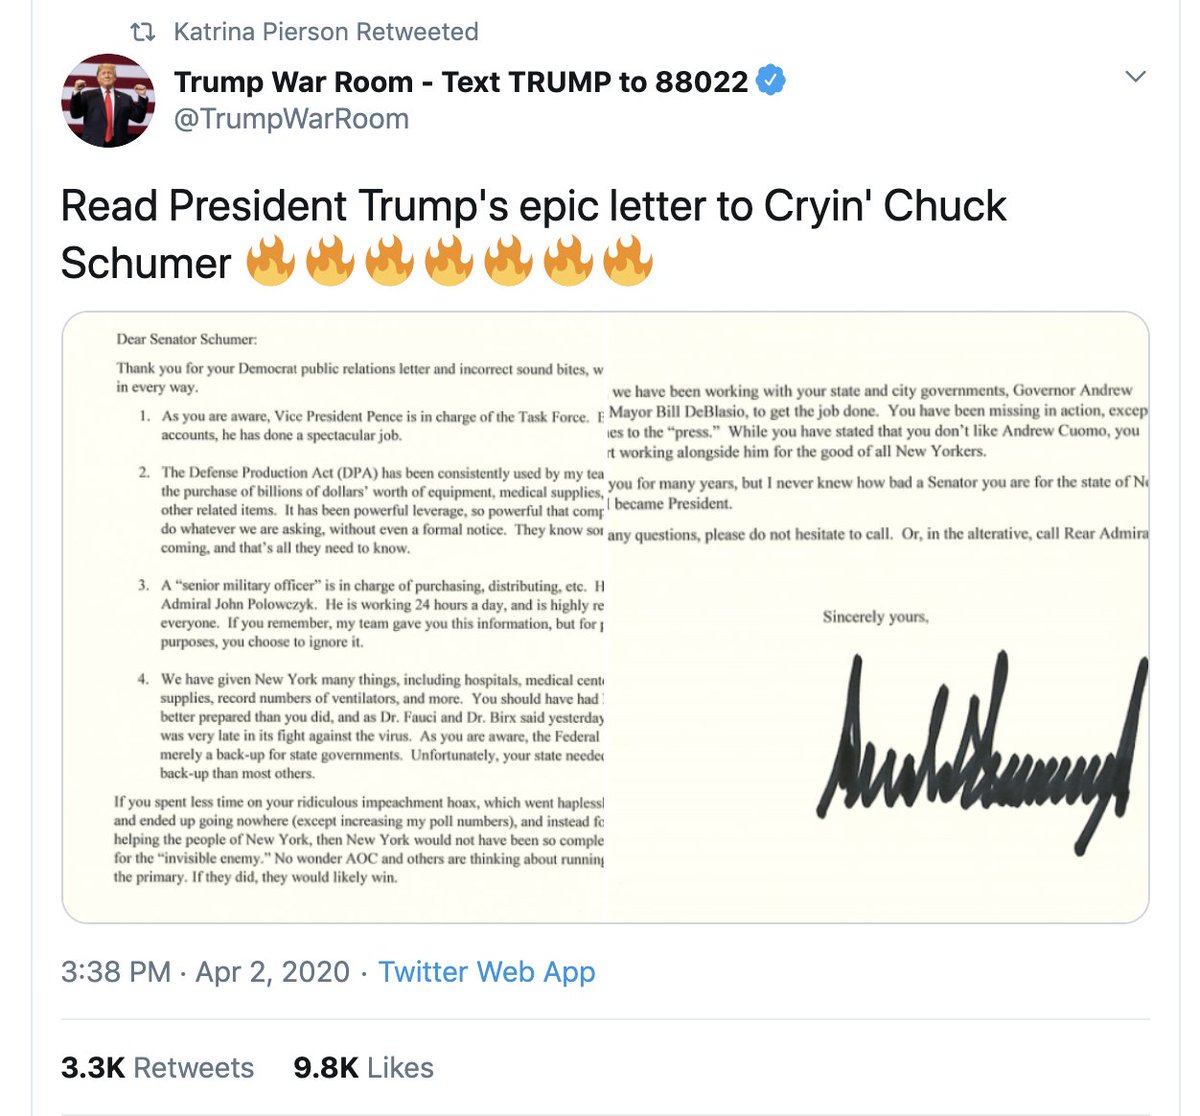 19/Blame SchumerTrump told Schumer that the reason New York wasn’t better able to handle the epidemic was because Schumer wasted all that time on the impeachment “hoax.”The White House believed it had delivered an epic burn